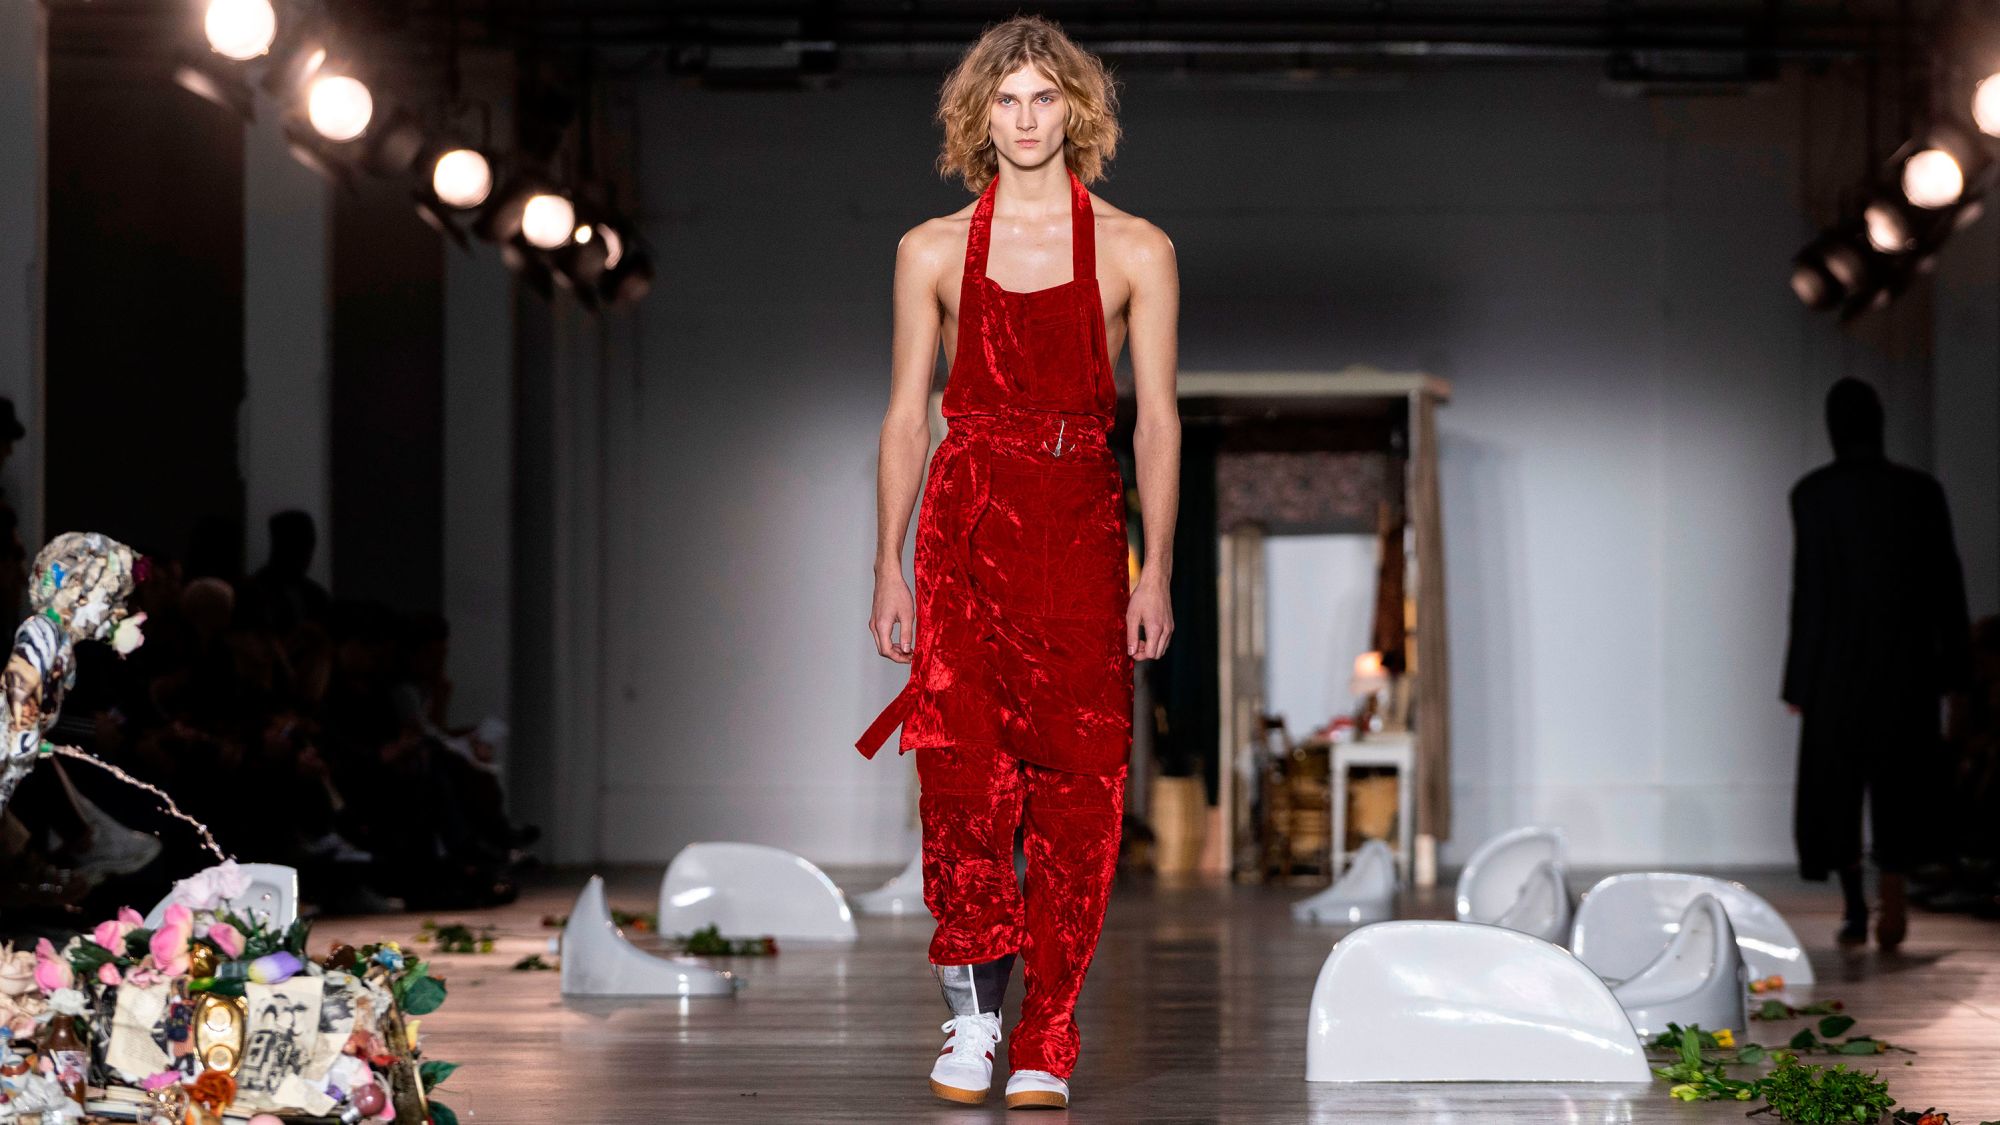 Meet the Designers Showing Gender-Neutral Clothing at Russia Fashion Week